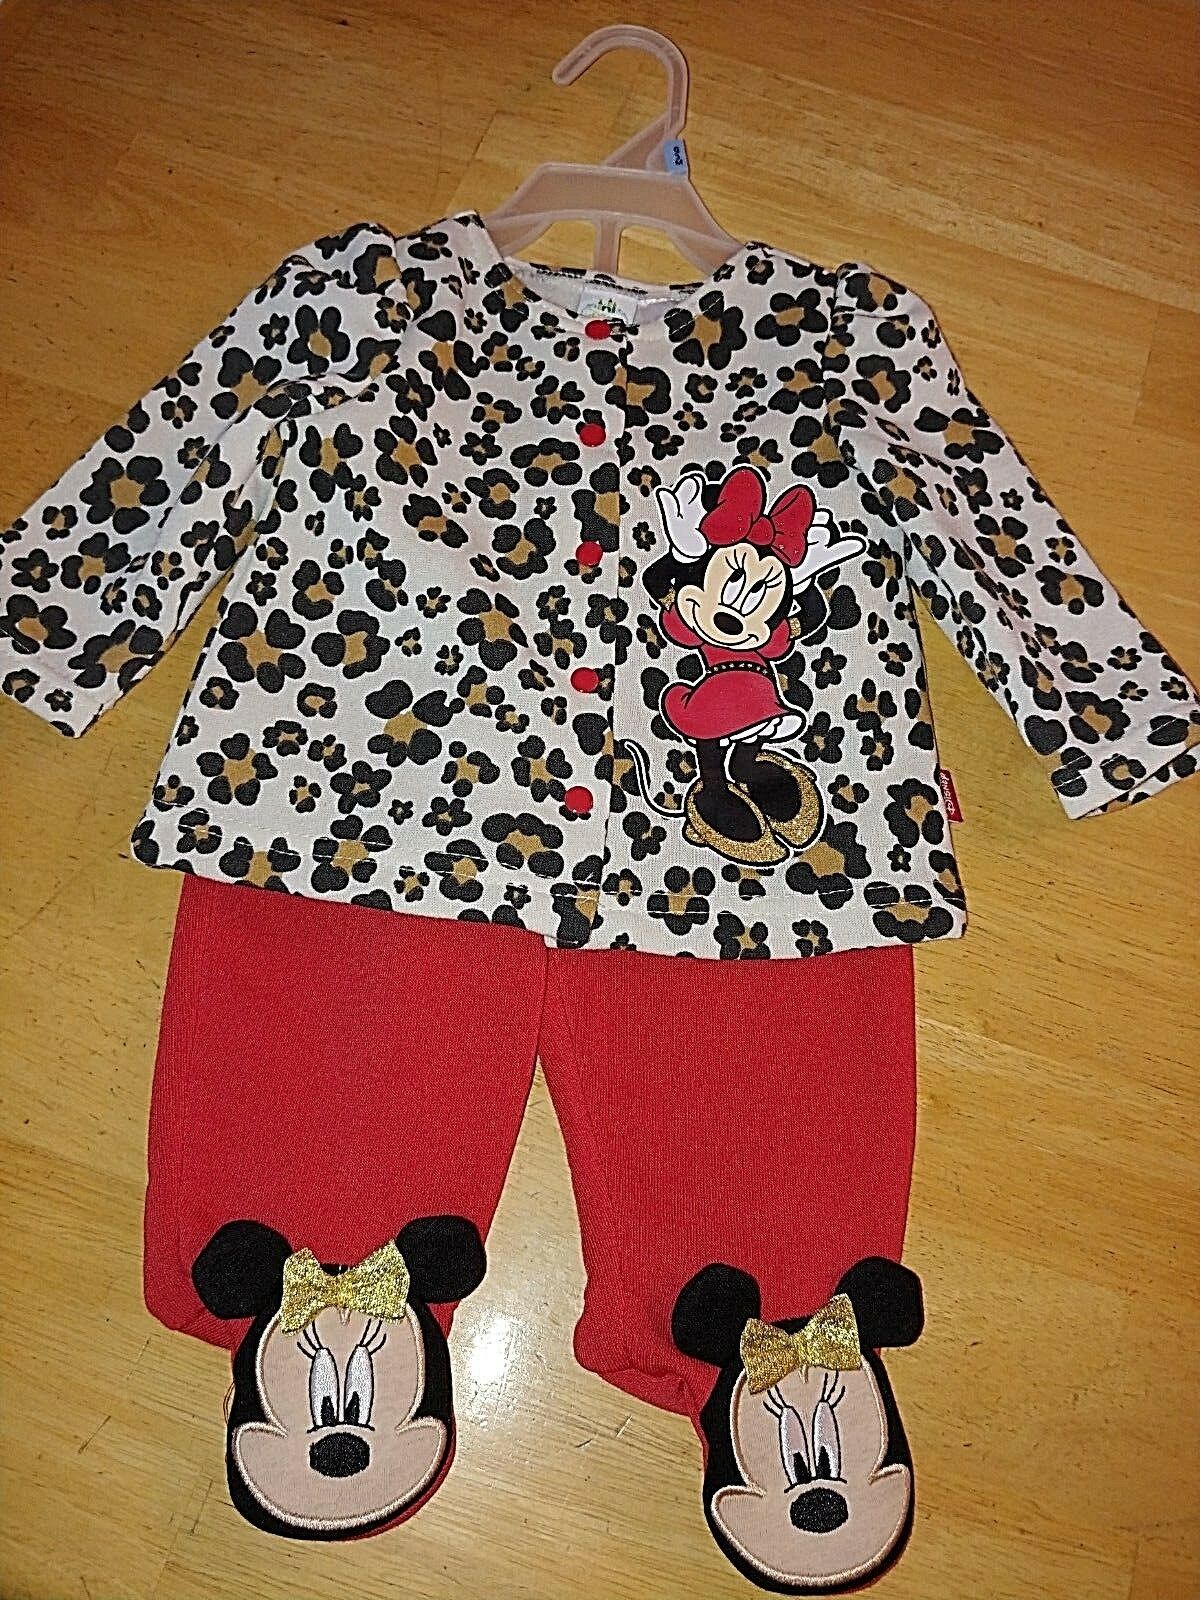 DISNEY BABY GIRL'S 2-PC POLYESTER KNIT SUIT-NWOT-MINNIE MOUSE-RED PANTS-0/3 MO - $12.00